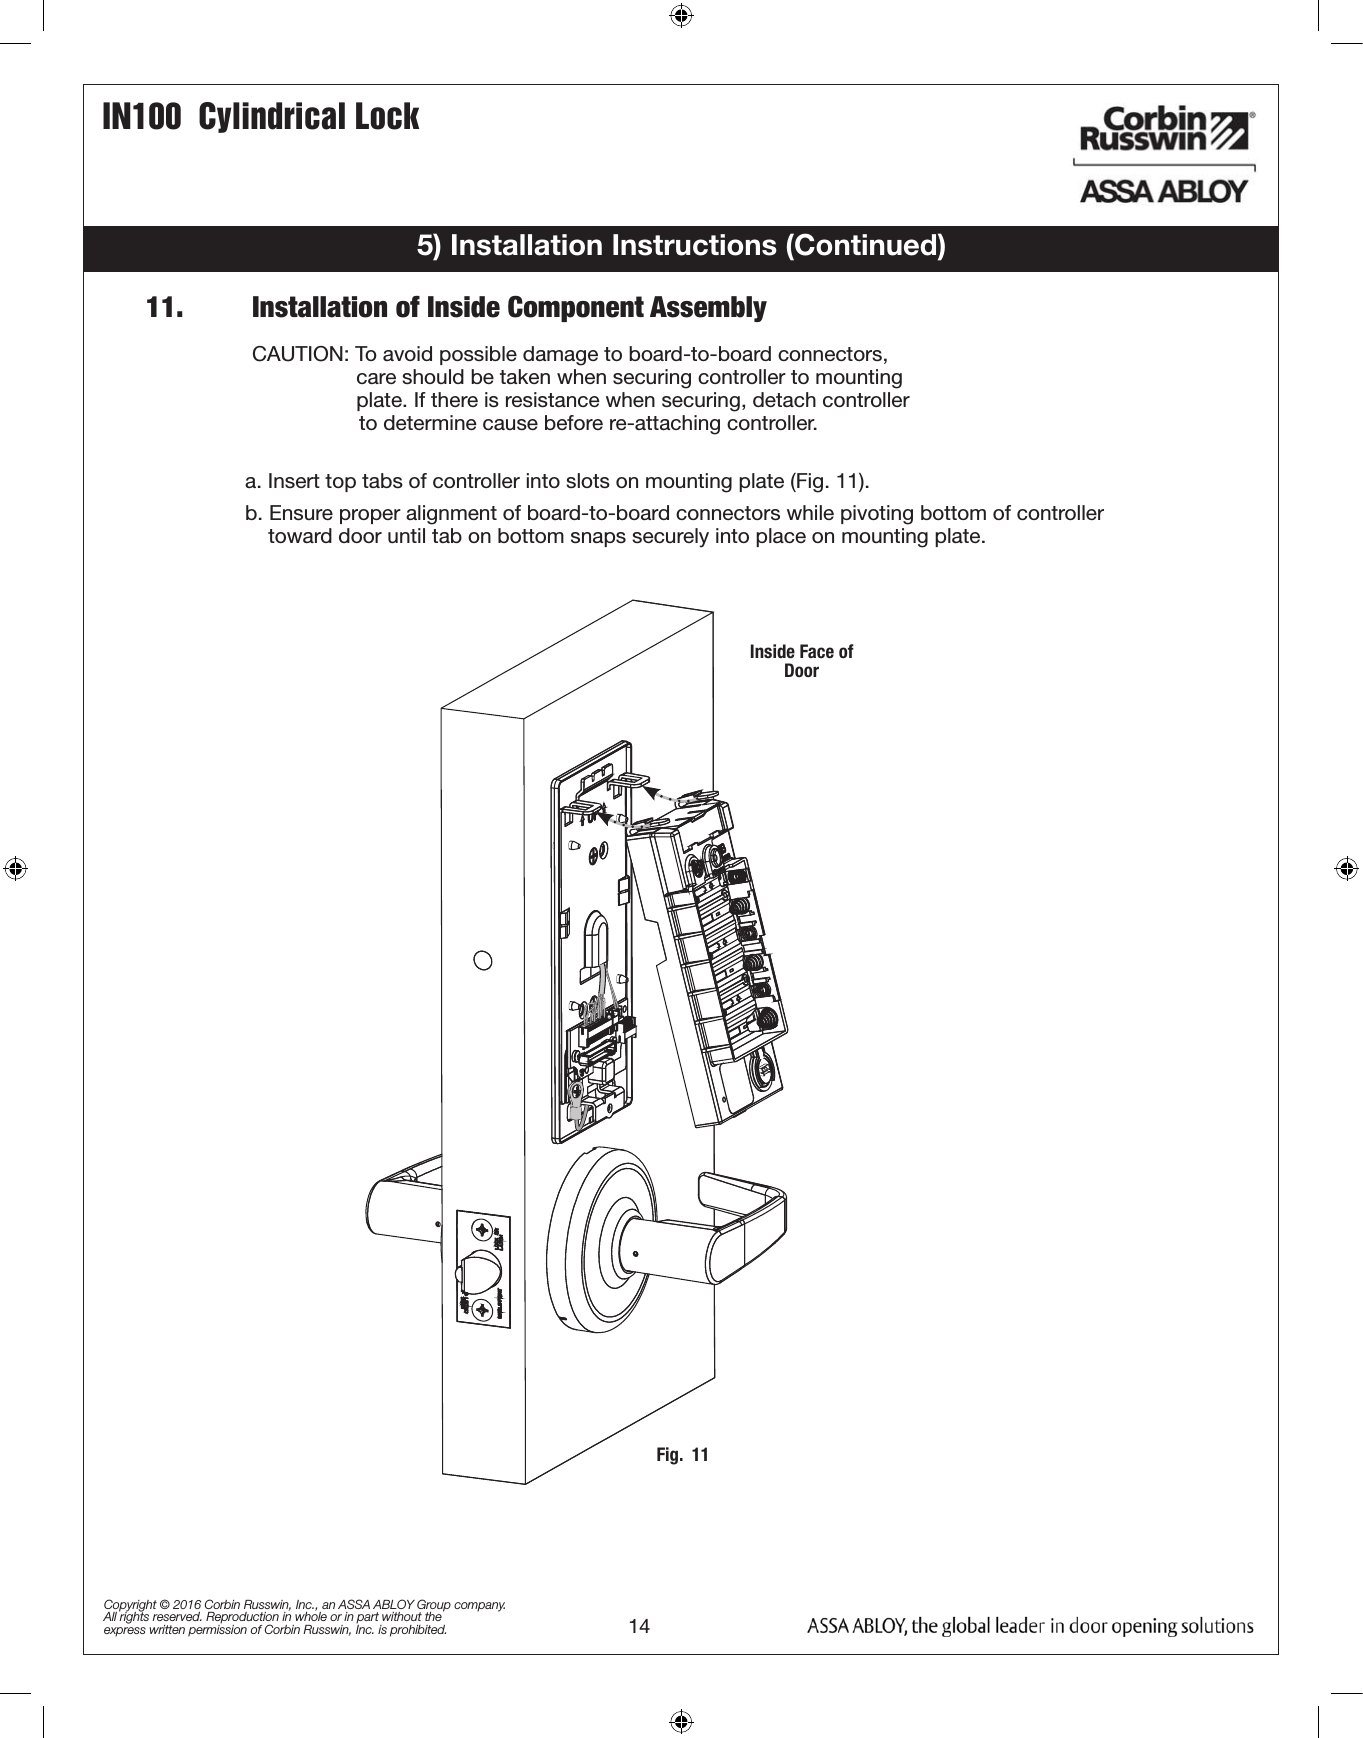 14IN100  Cylindrical LockCopyright © 2016 Corbin Russwin, Inc., an ASSA ABLOY Group company. All rights reserved. Reproduction in whole or in part without the express written permission of Corbin Russwin, Inc. is prohibited.5) Installation Instructions (Continued)11.         Installation of Inside Component Assemblya. Insert top tabs of controller into slots on mounting plate (Fig. 11).b. Ensure proper alignment of board-to-board connectors while pivoting bottom of controller            toward door until tab on bottom snaps securely into place on mounting plate.  CAUTION: To avoid possible damage to board-to-board connectors,                    care should be taken when securing controller to mounting                    plate. If there is resistance when securing, detach controller                  to determine cause before re-attaching controller.Fig.  11Inside Face of Door